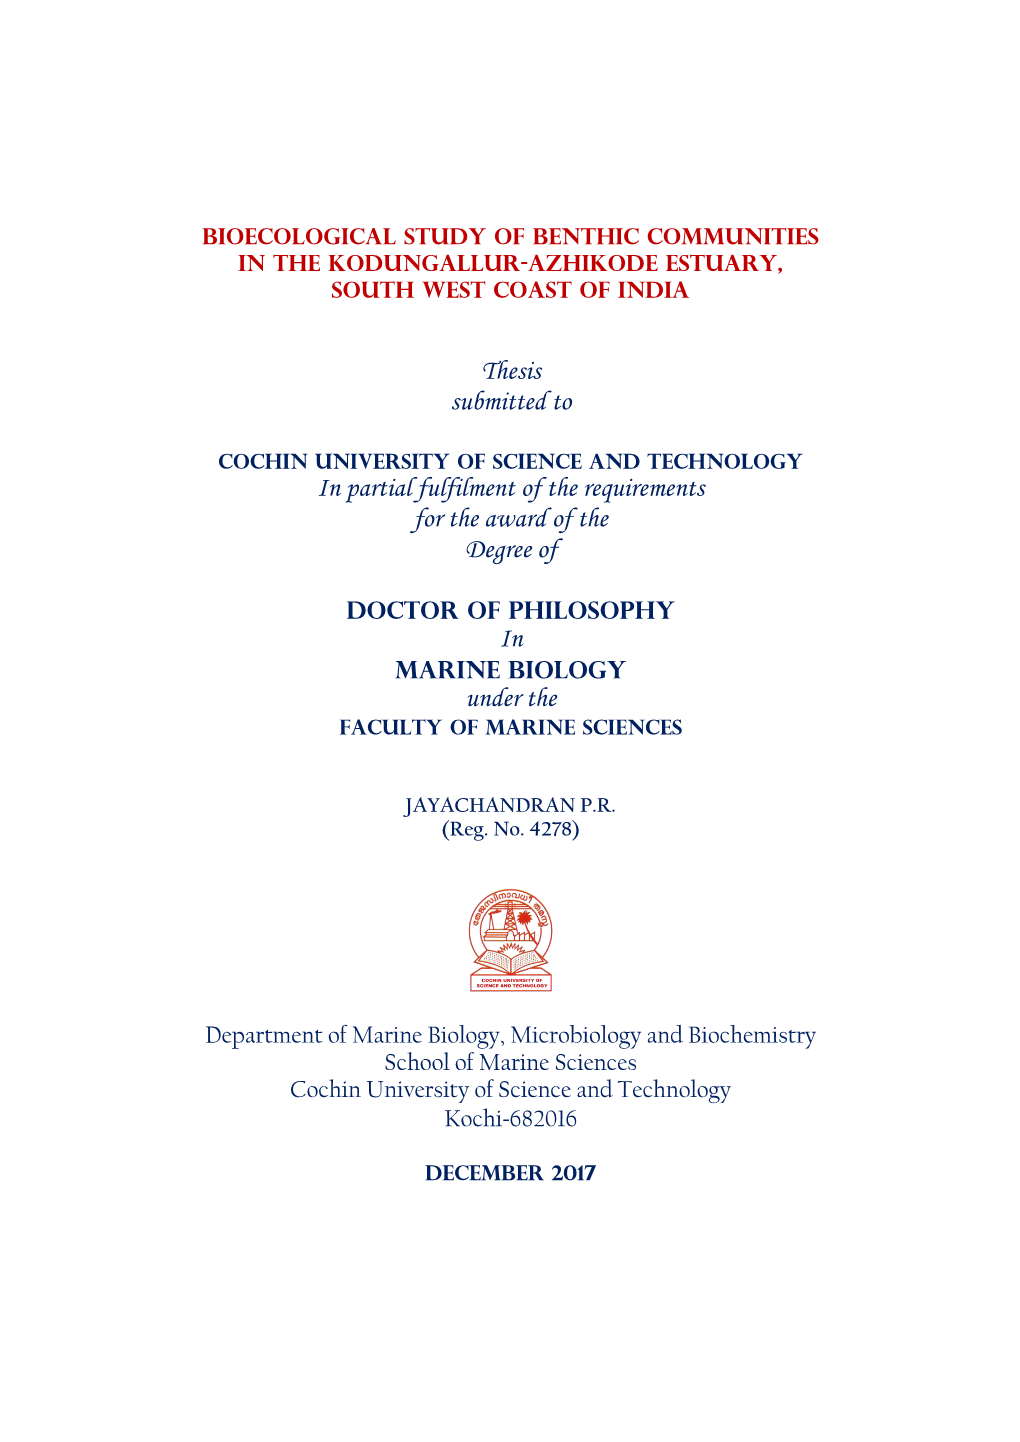 Thesis Submitted to in Partial Fulfilment of the Requirements for the Award Of